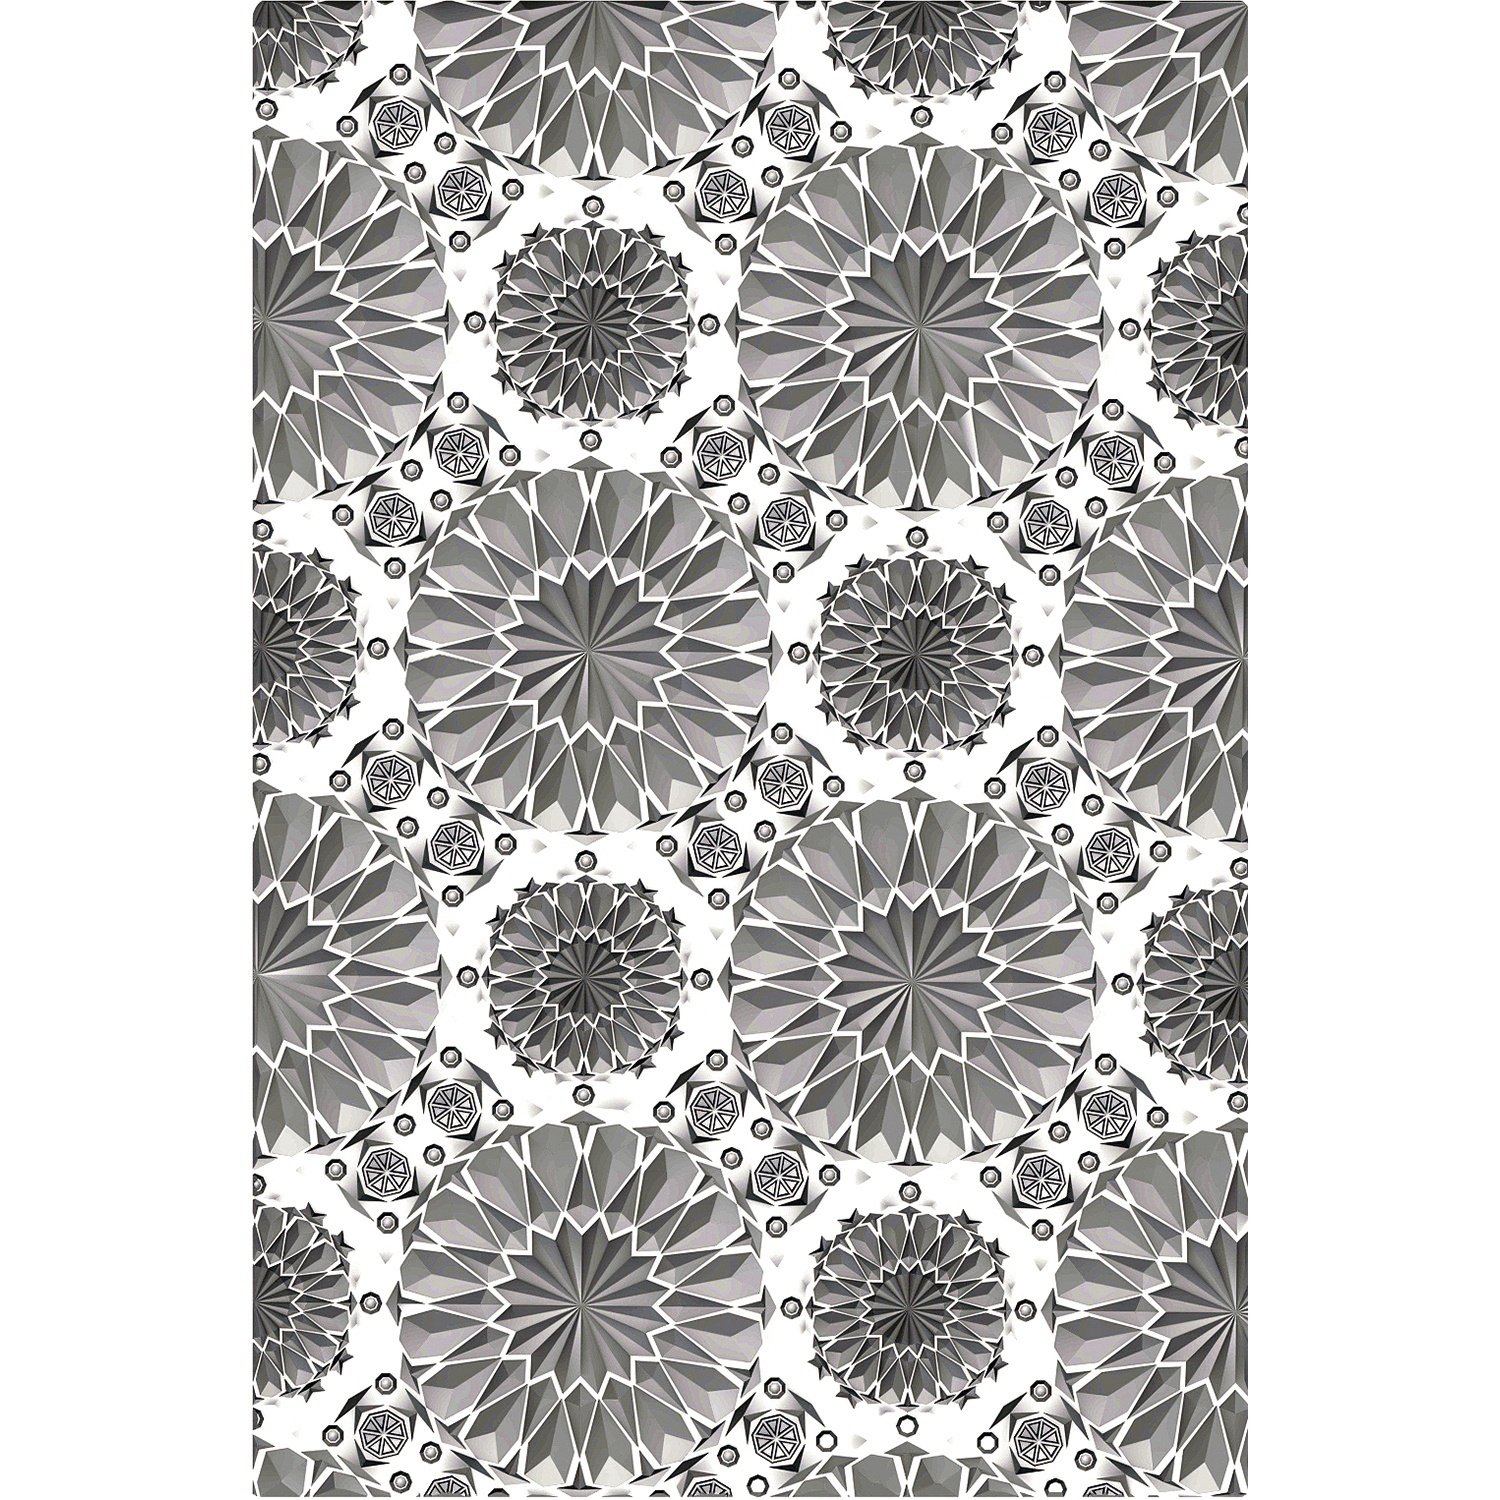 Doily Sizzix 3D Texture Fades Embossing Folder by Tim Holtz 